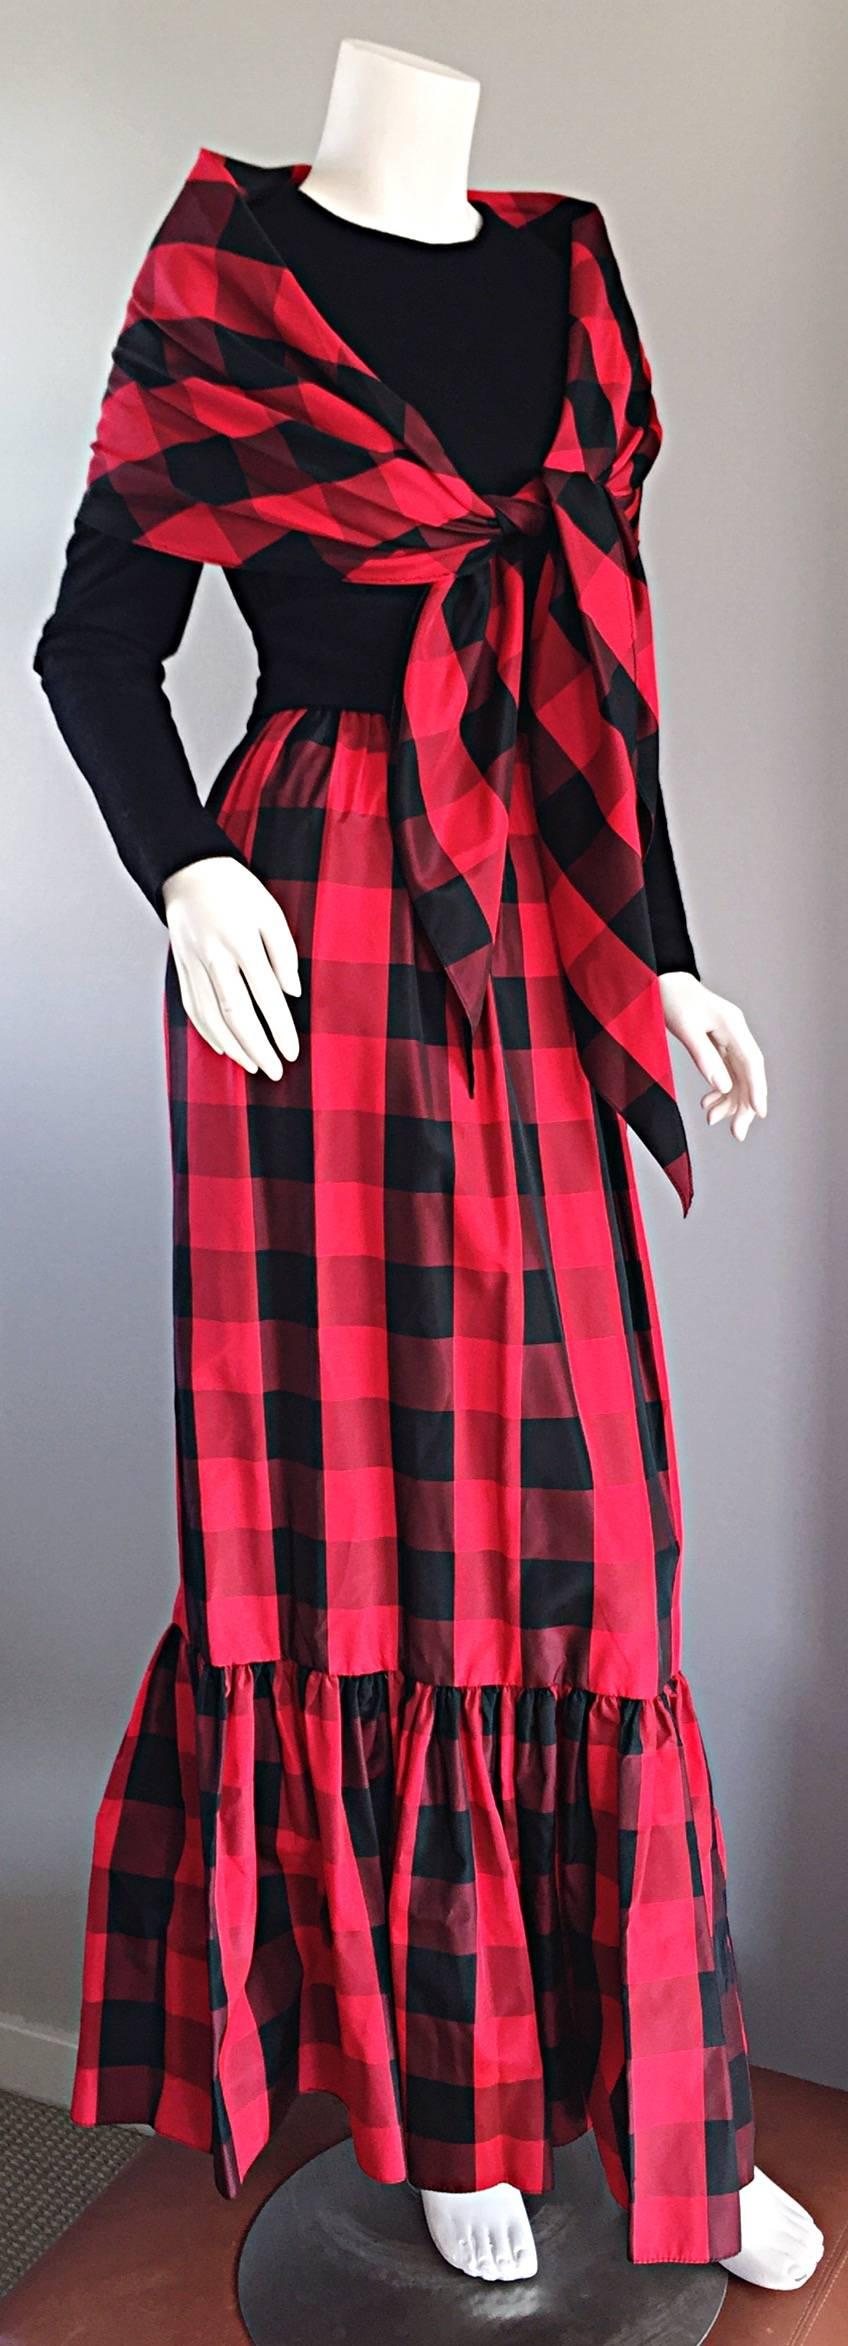 checkered dress red and black